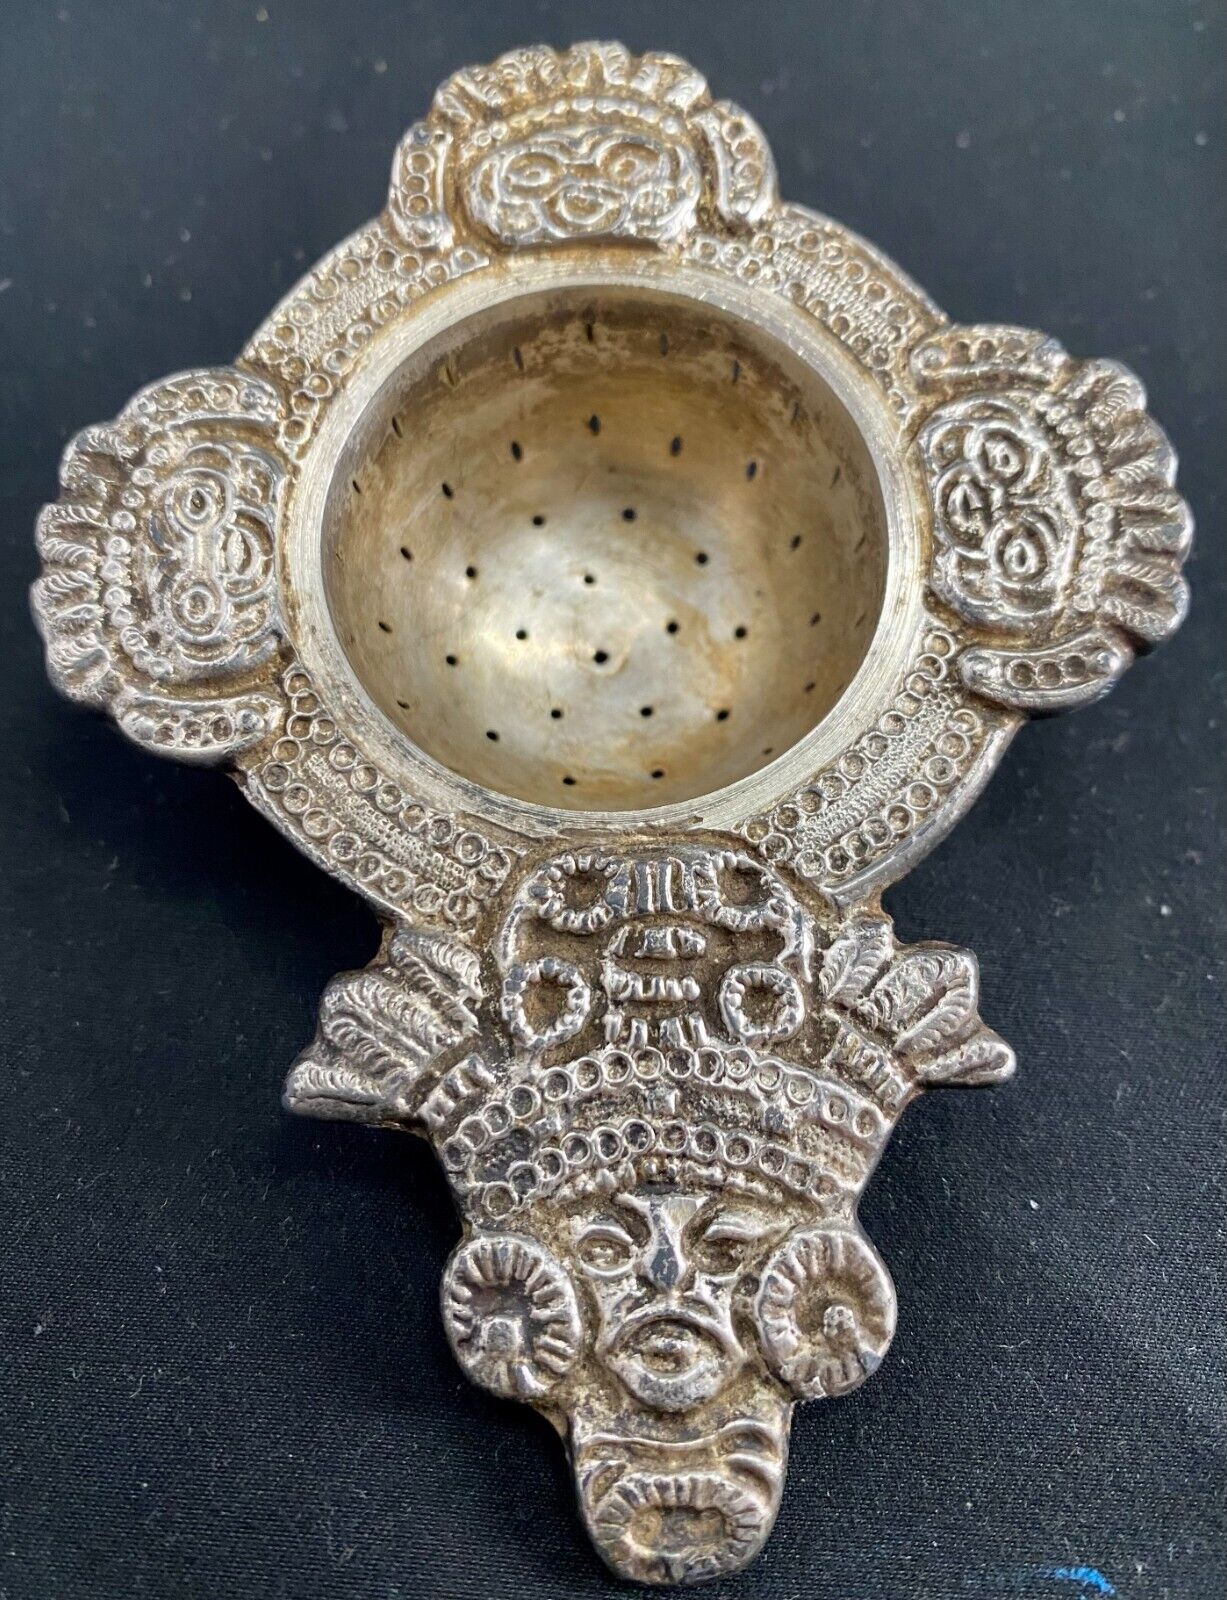 BEAUTIFUL ANTIQUE SILVER/SILVER PLATED TEA STRAINER ORNATE WITH INCAS FIGURE v/g